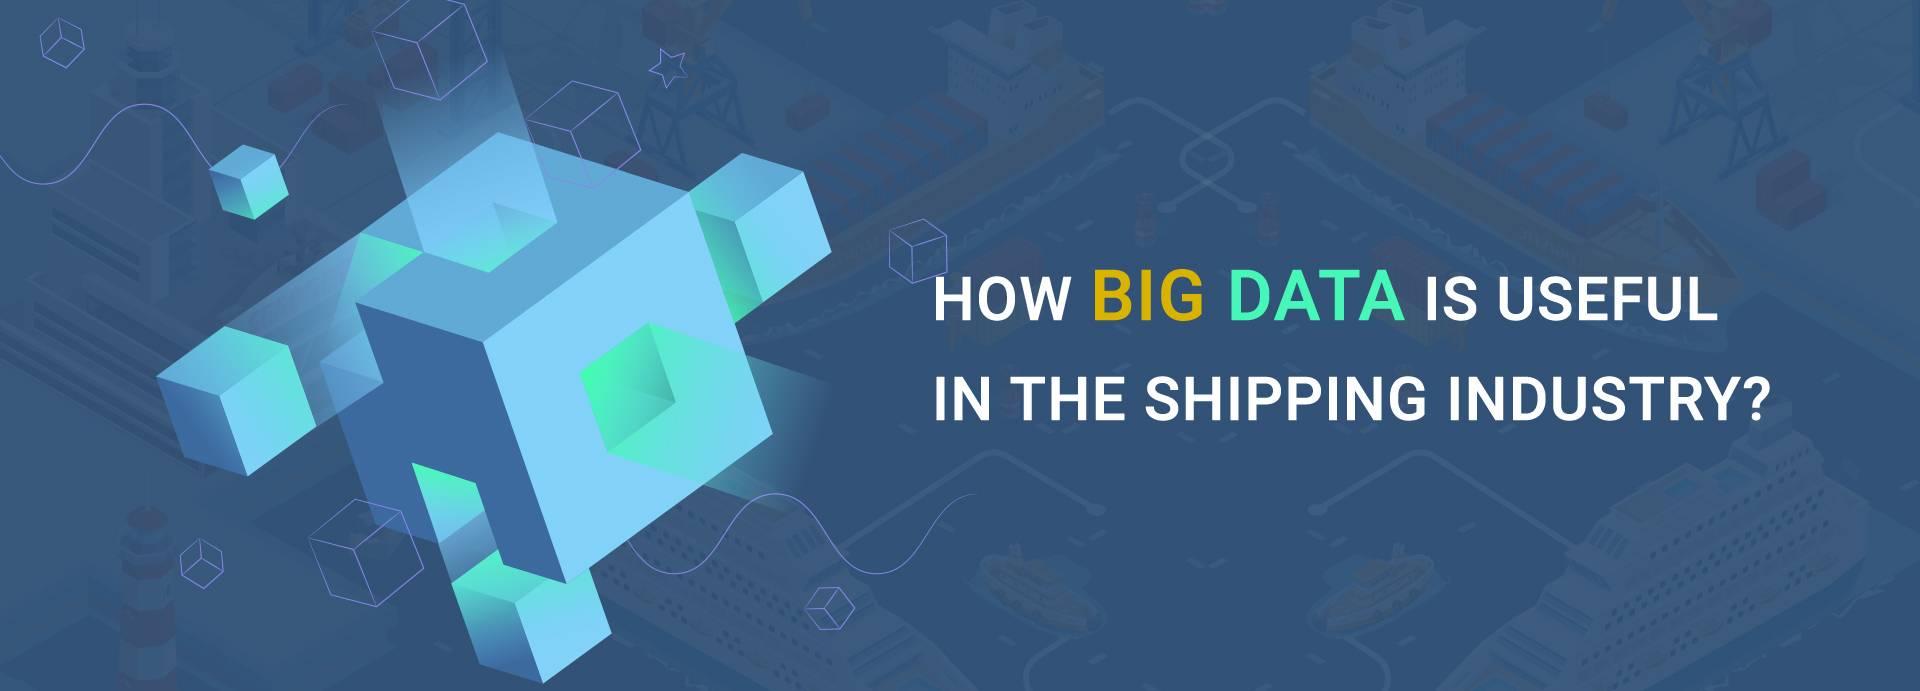 How Big Data Is Used In The Shipping Industry?